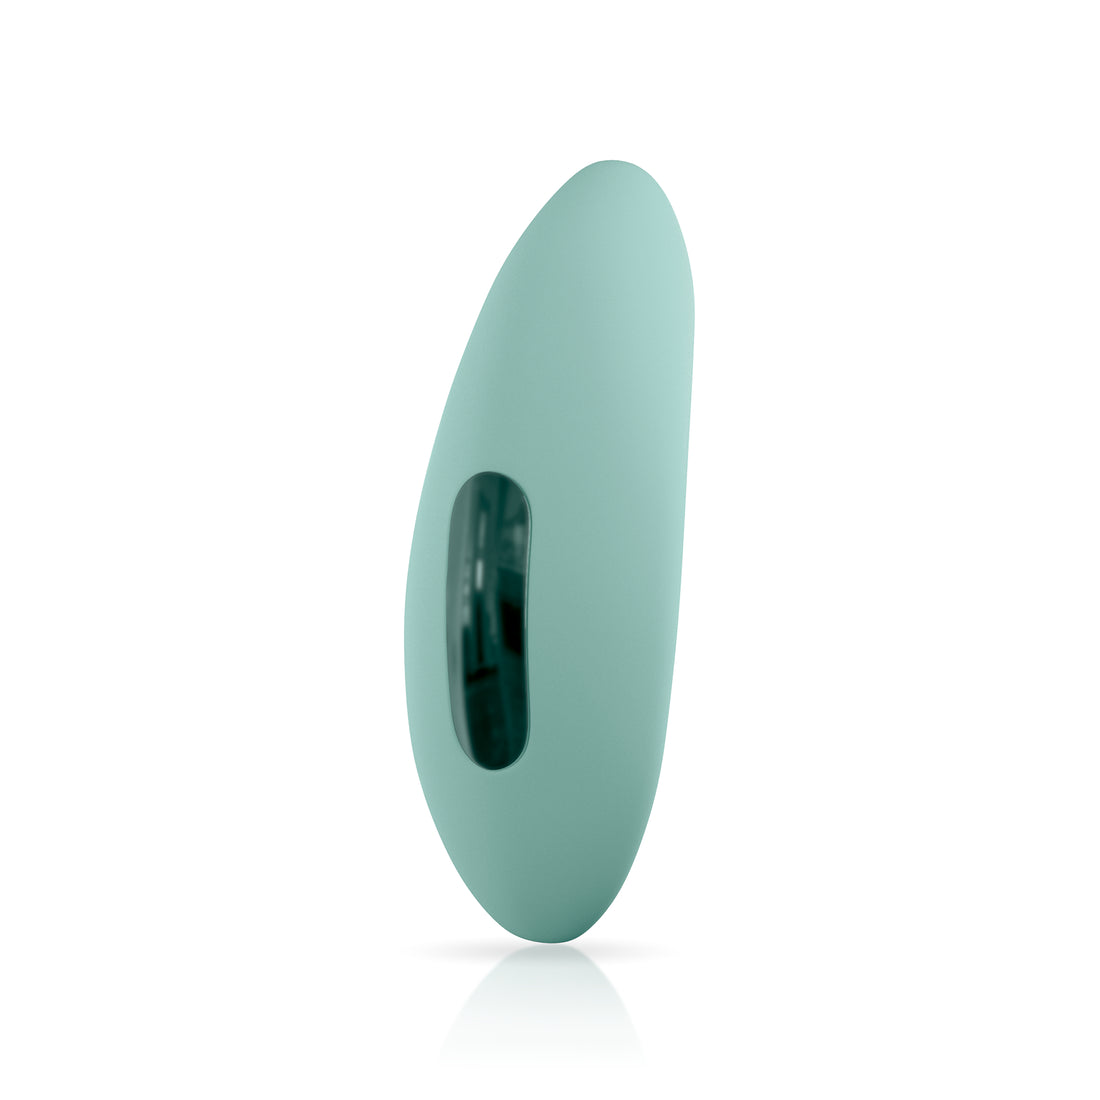 Angled side view of clitoral vibrator JJ-cactus green